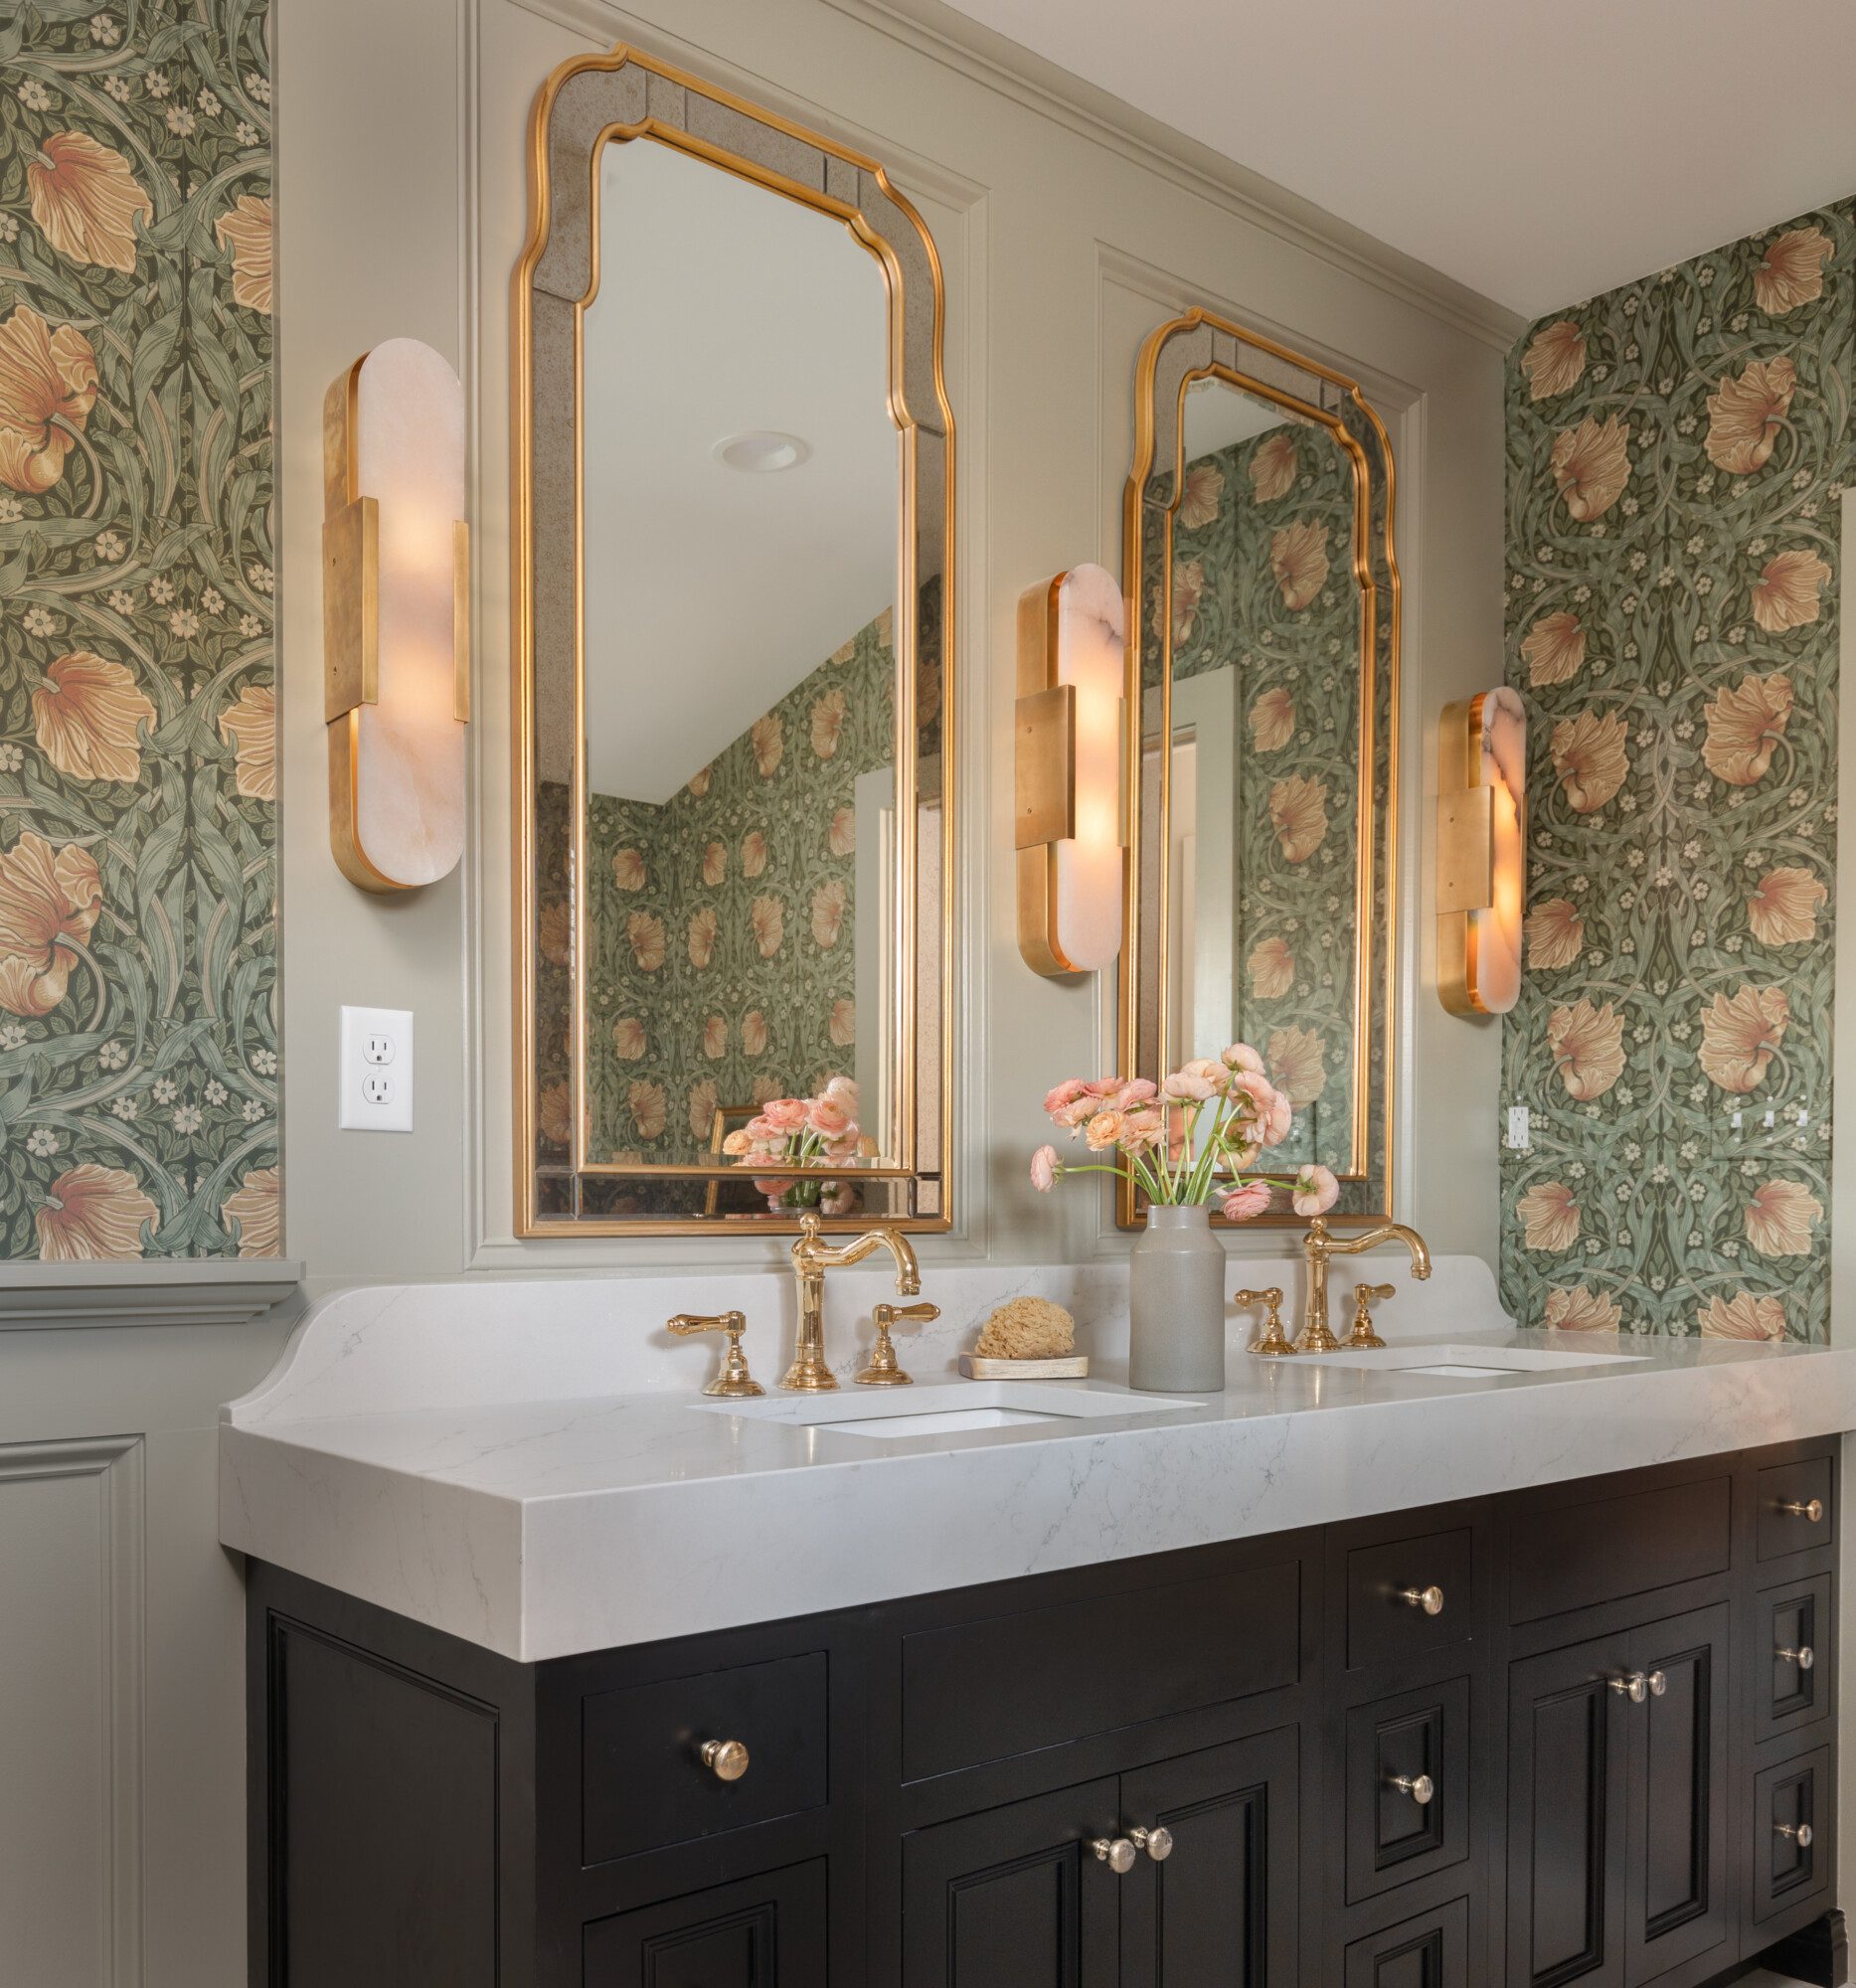 Bathroom with flower pattern wallpaper and marble countertops and gold accents